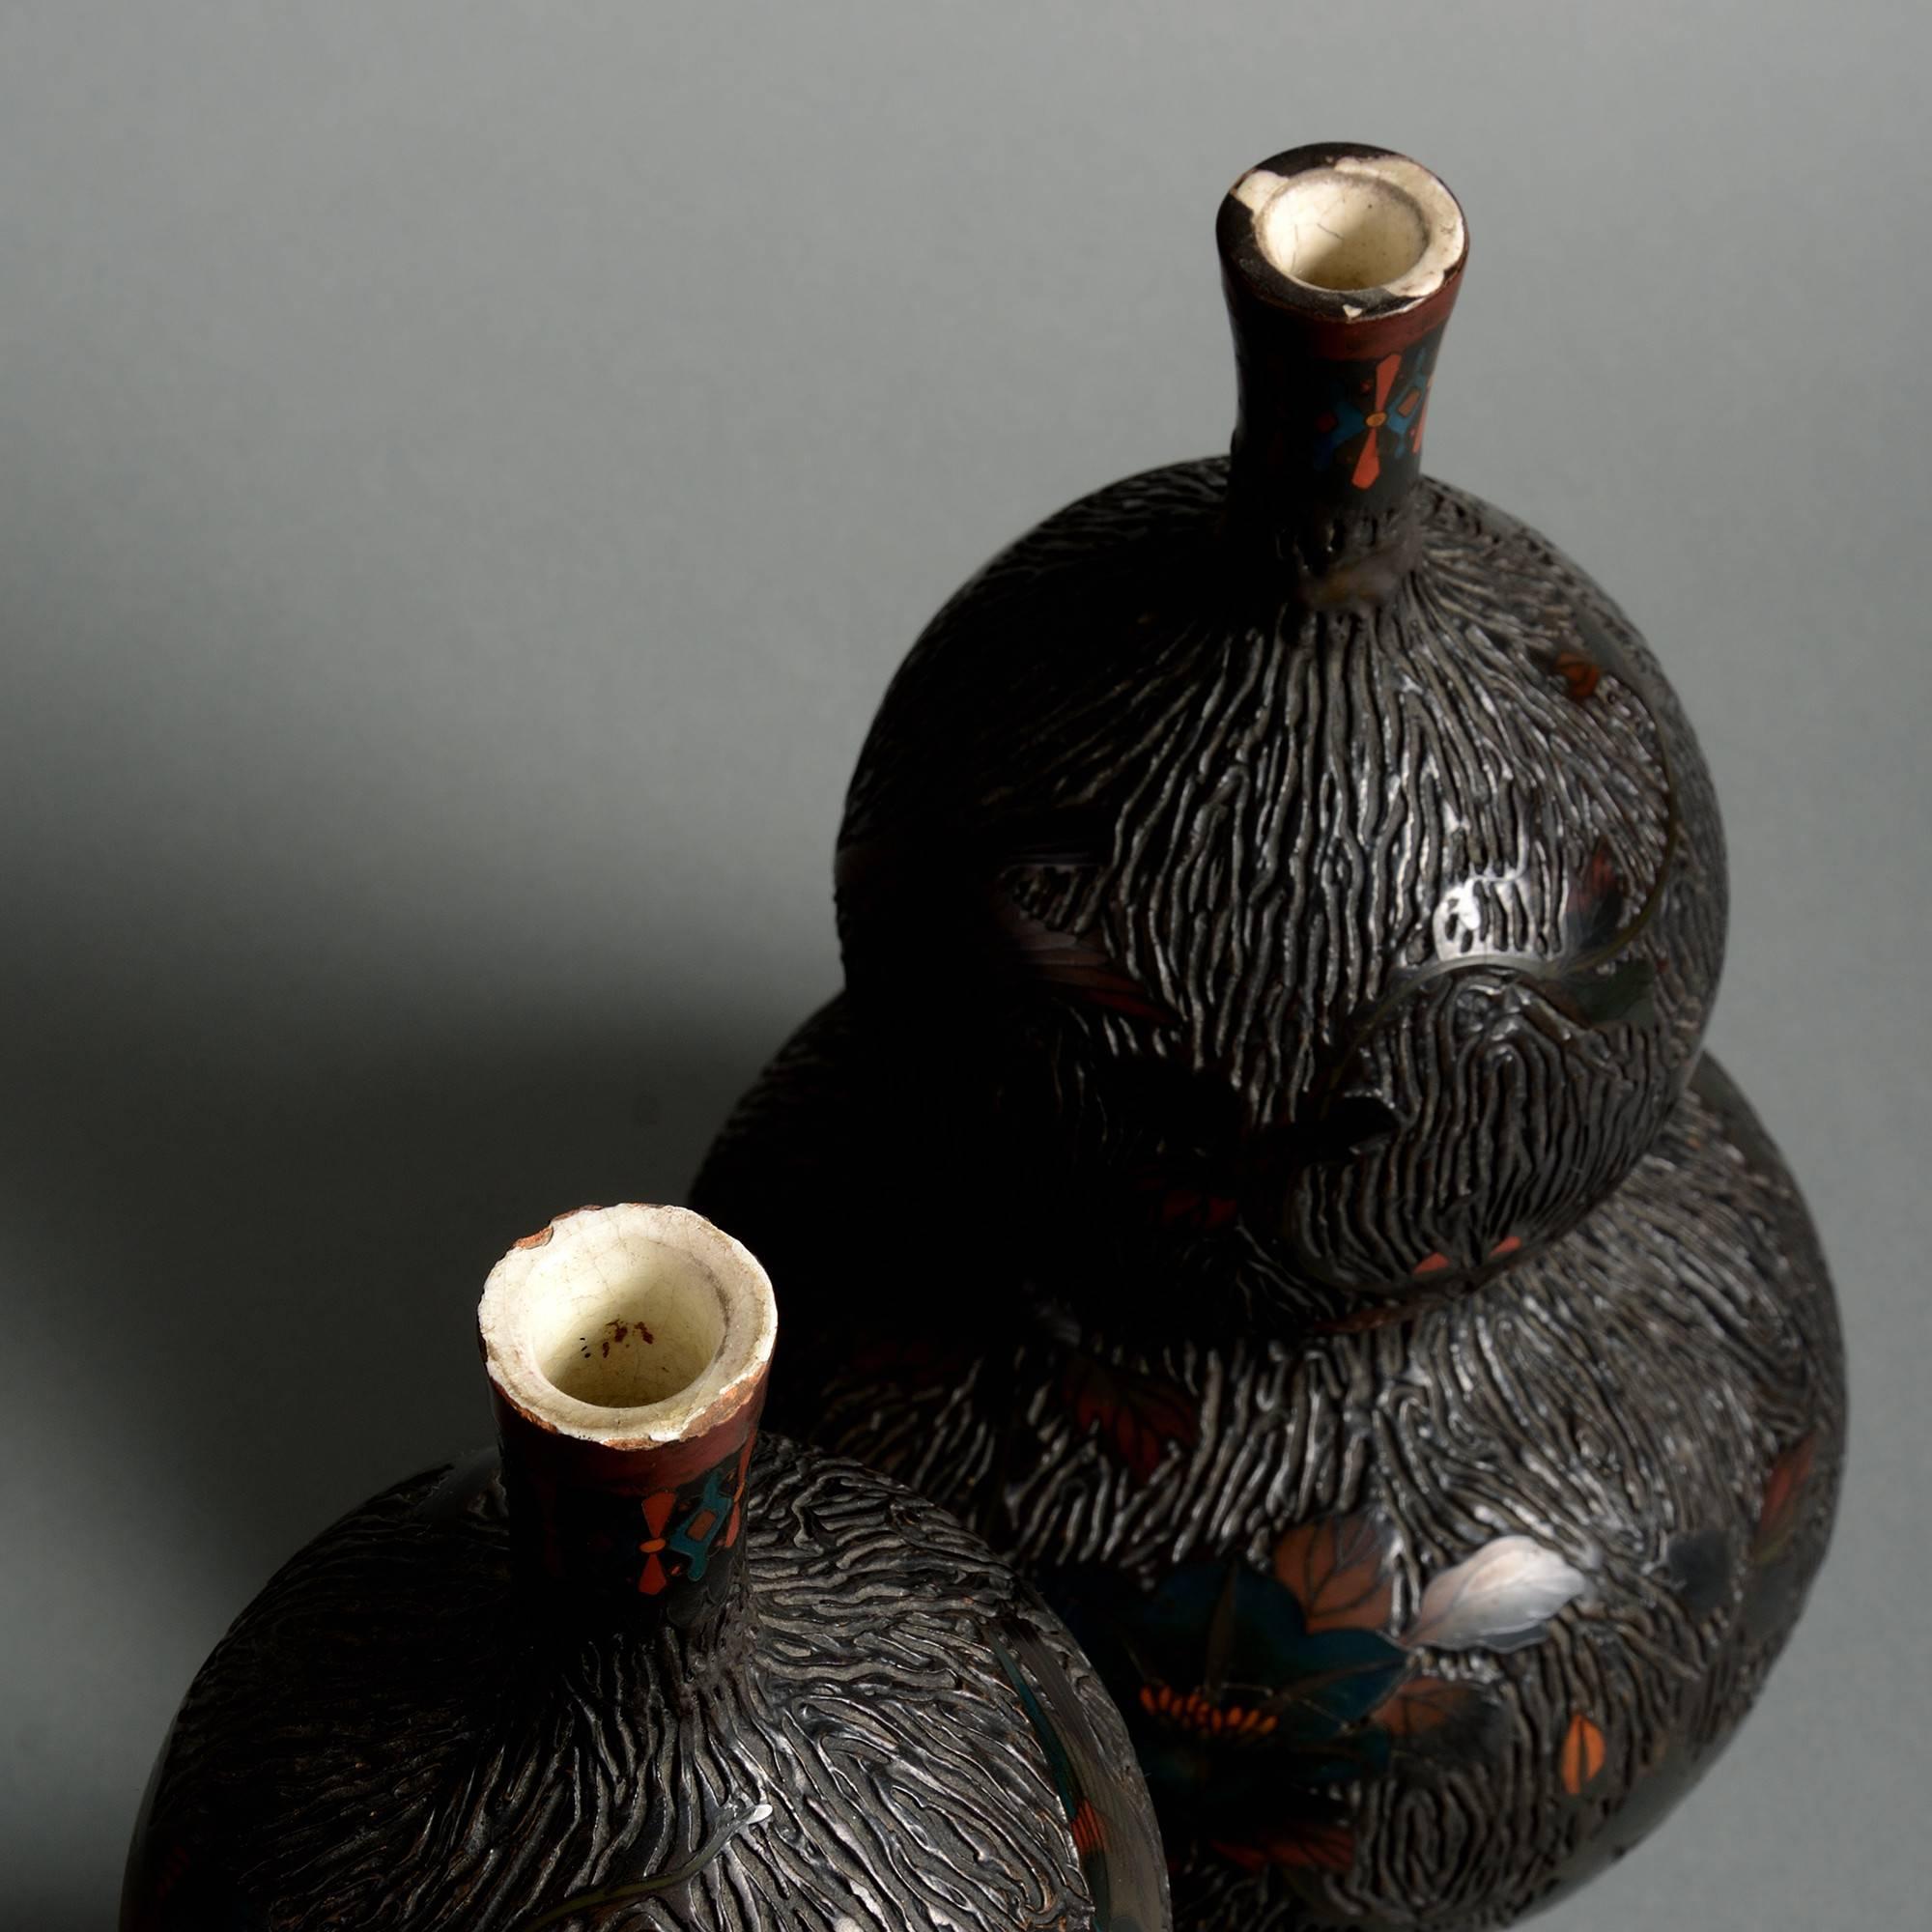 Japanese 19th Century Pair of Black Cloisonné and Gourd Vases with red and blue flowers